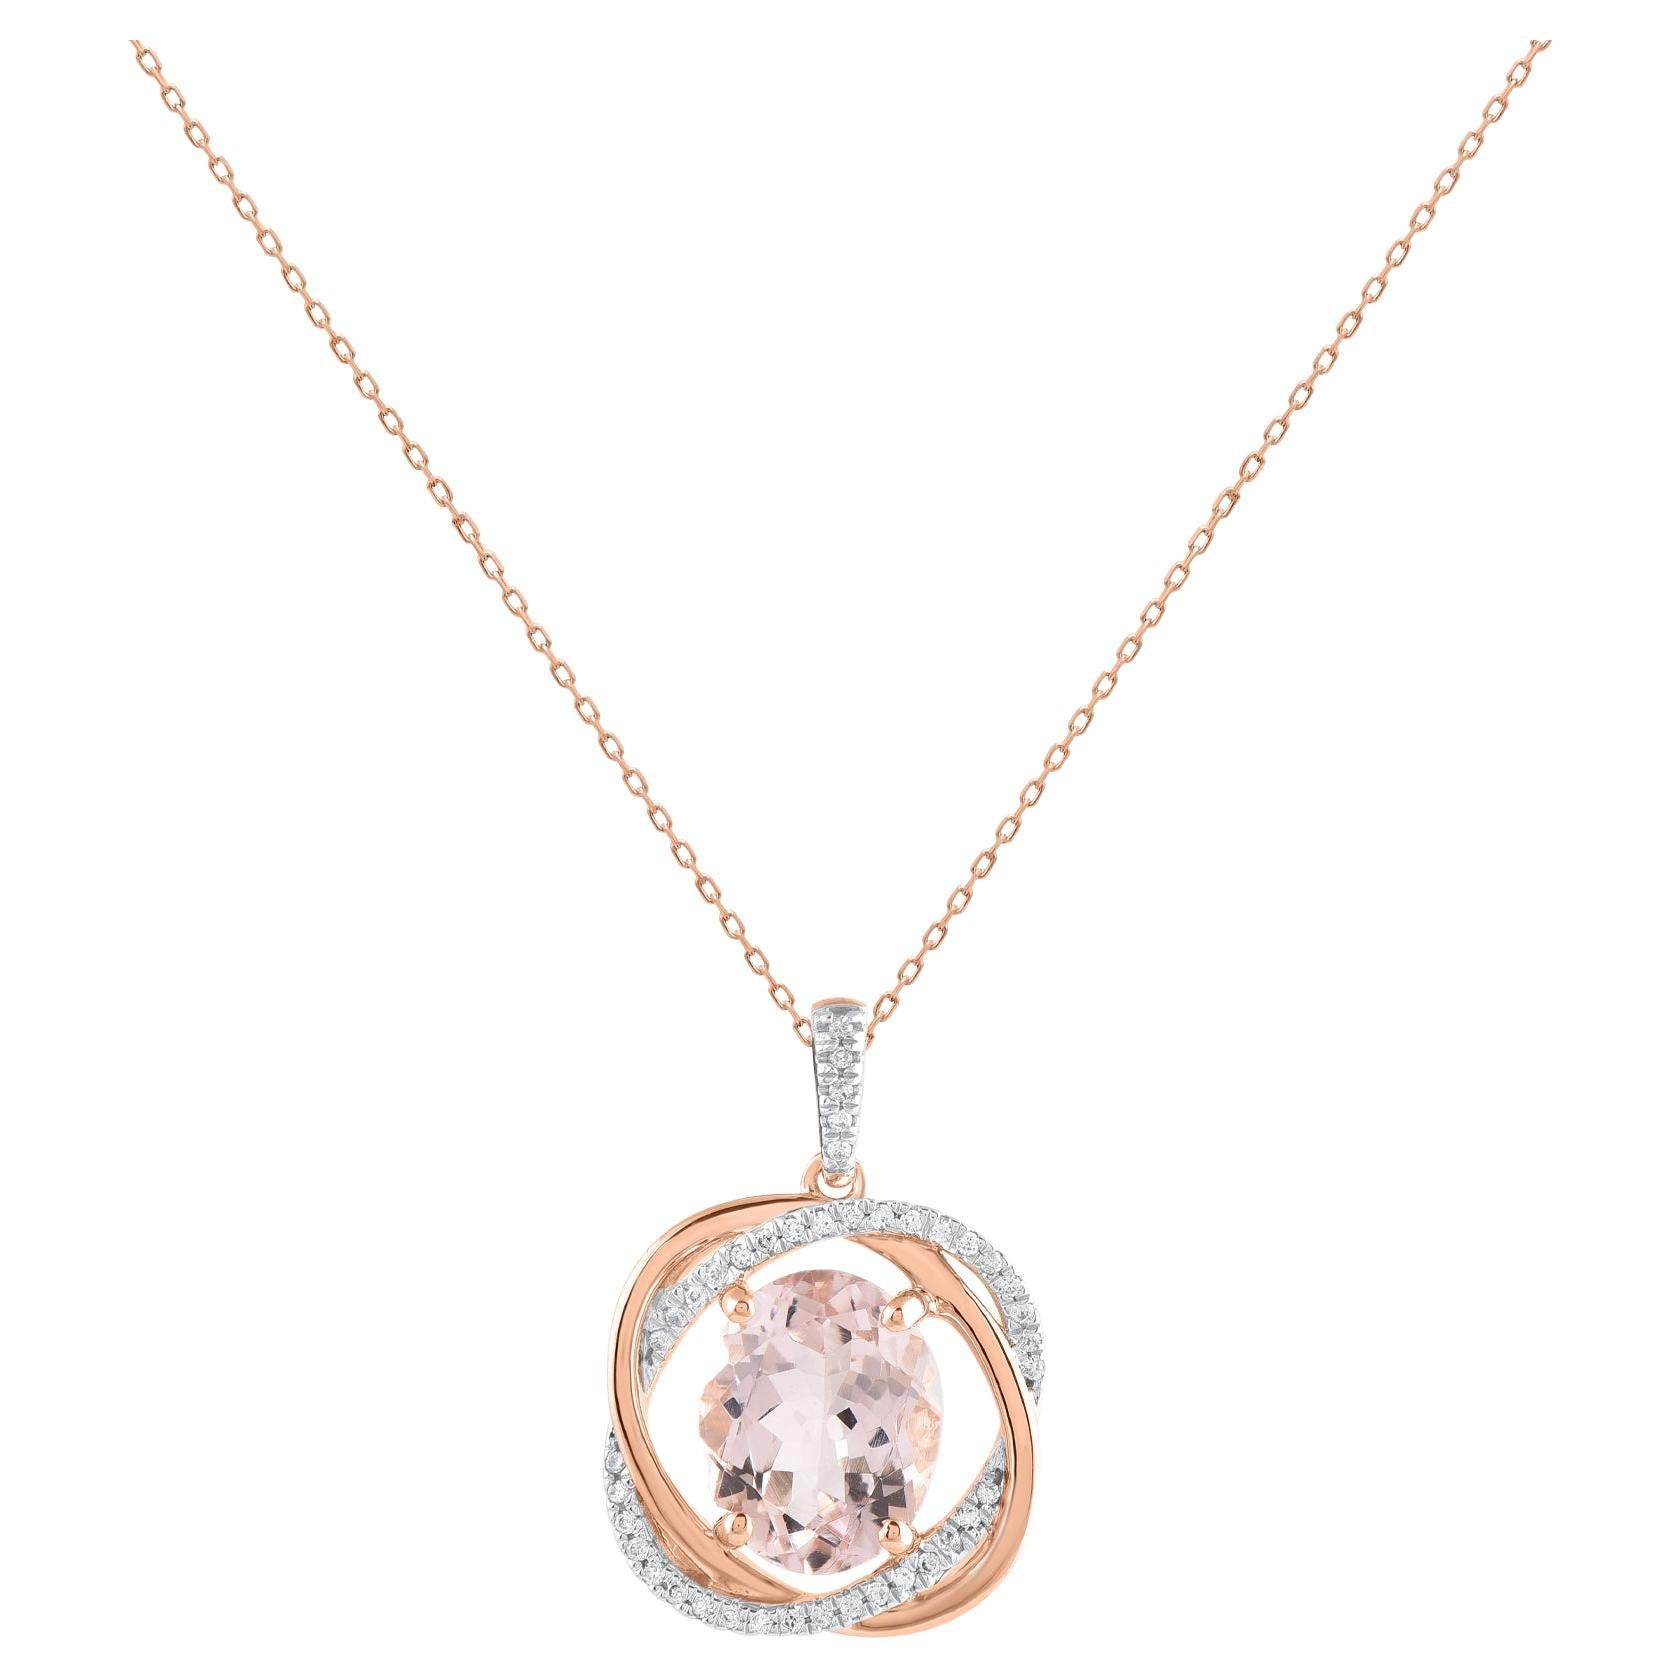 TJD 0.12 Ct Diamond and 2 Ct Oval Morganite Pendant Necklace in 18KT Rose Gold For Sale